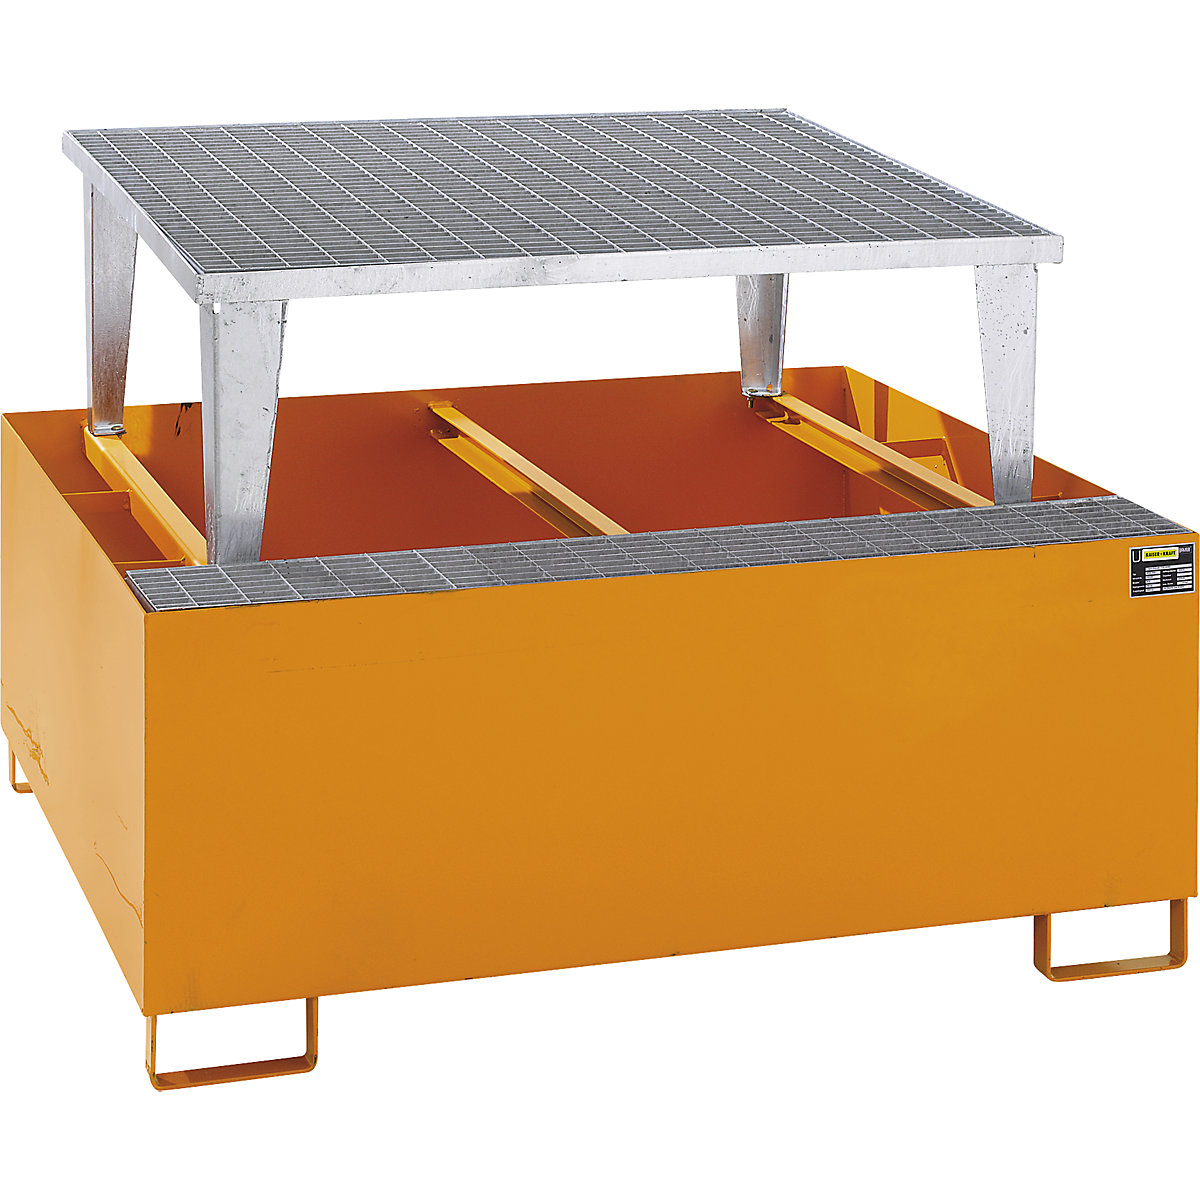 Steel sump tray for IBC/CTC tank containers - eurokraft pro